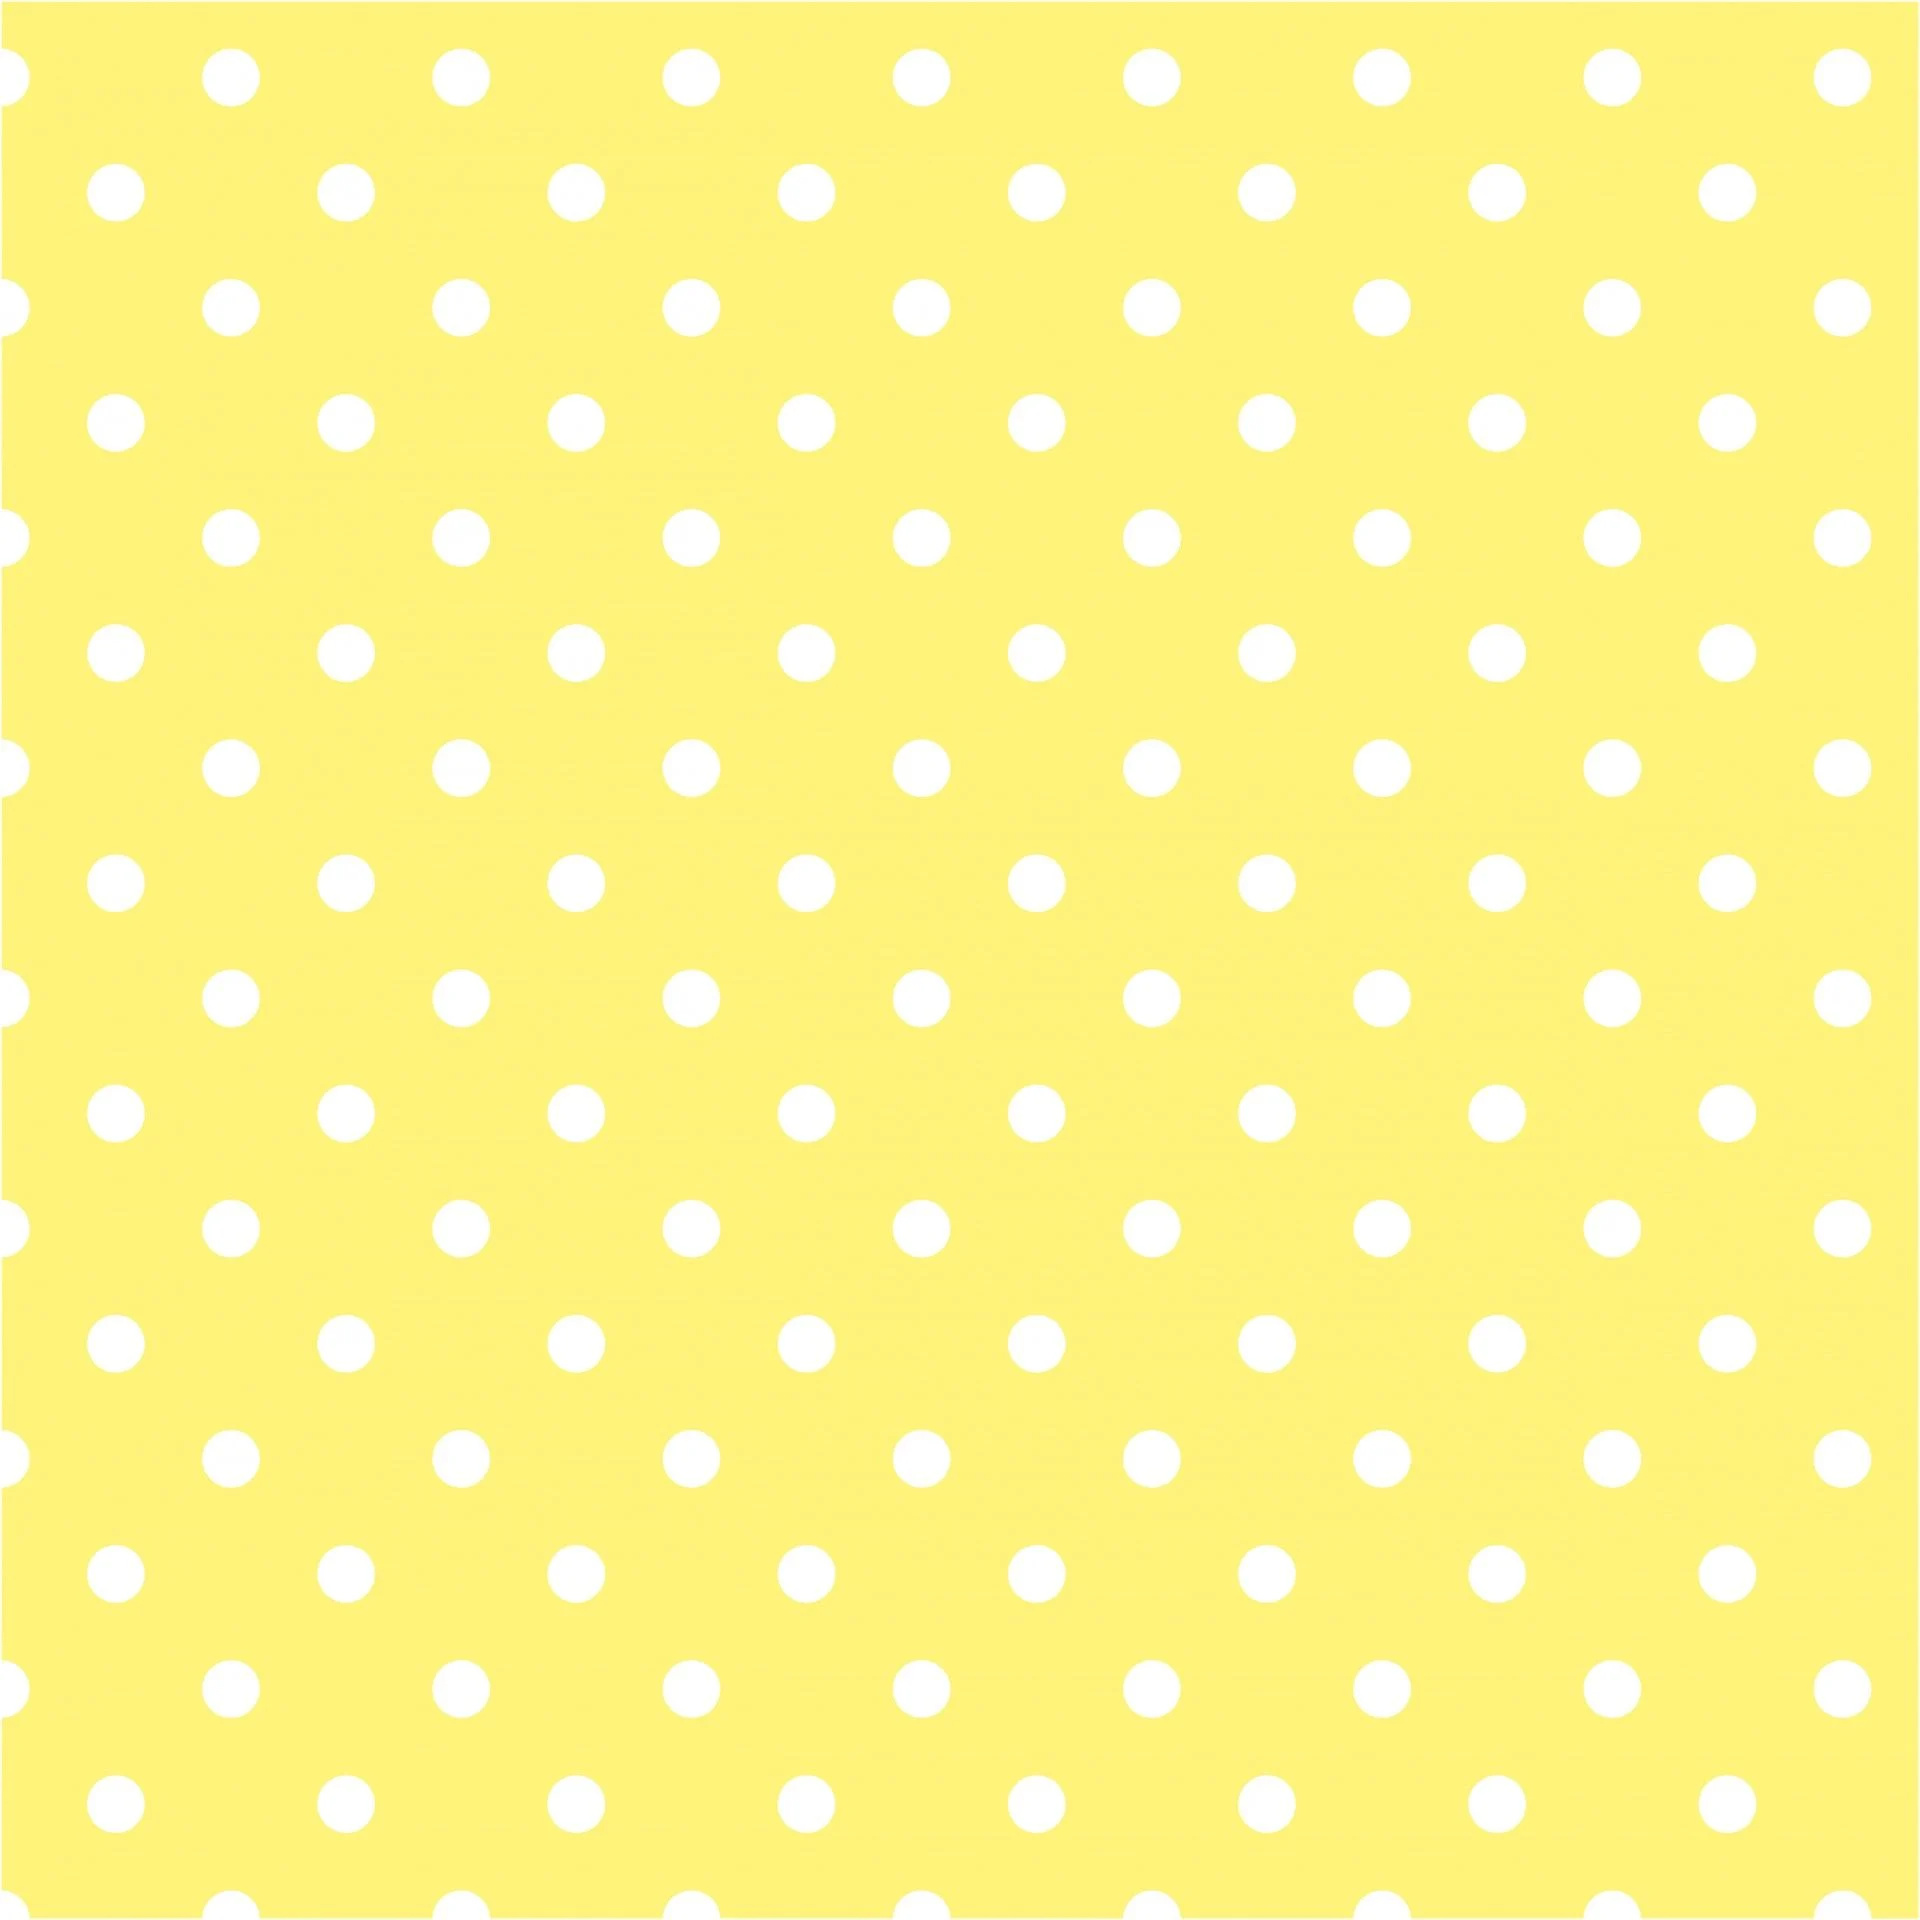 Polka Dot, Yellow accents, Vibrant and cheerful, Eye-catching, 1920x1920 HD Handy